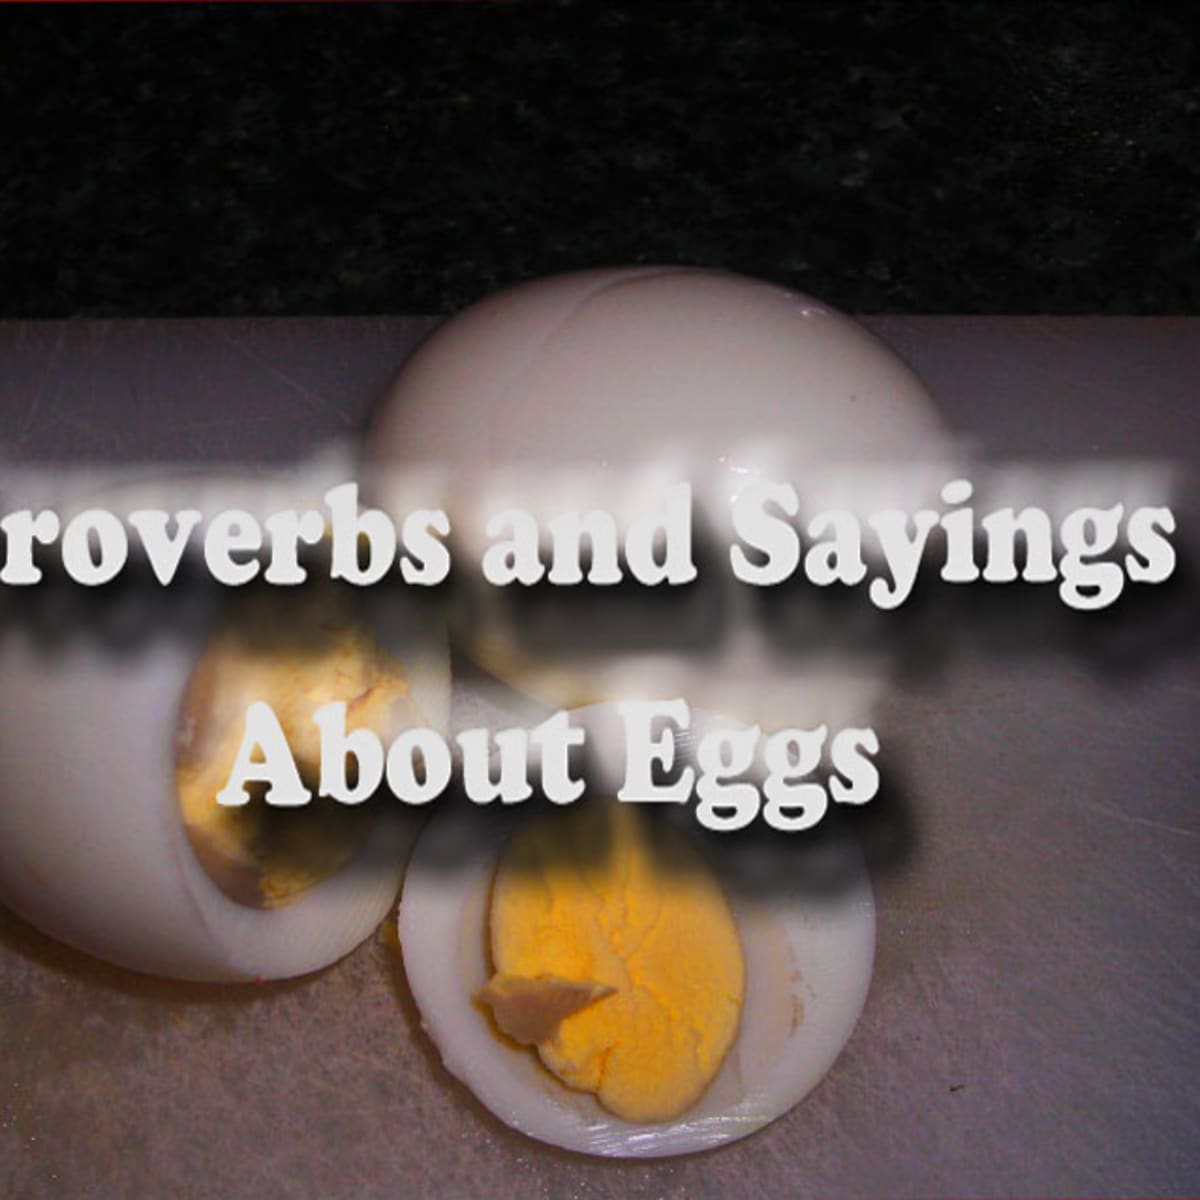 11 English Idioms and Sayings About Eggs, and 7 Egg Puns - HubPages